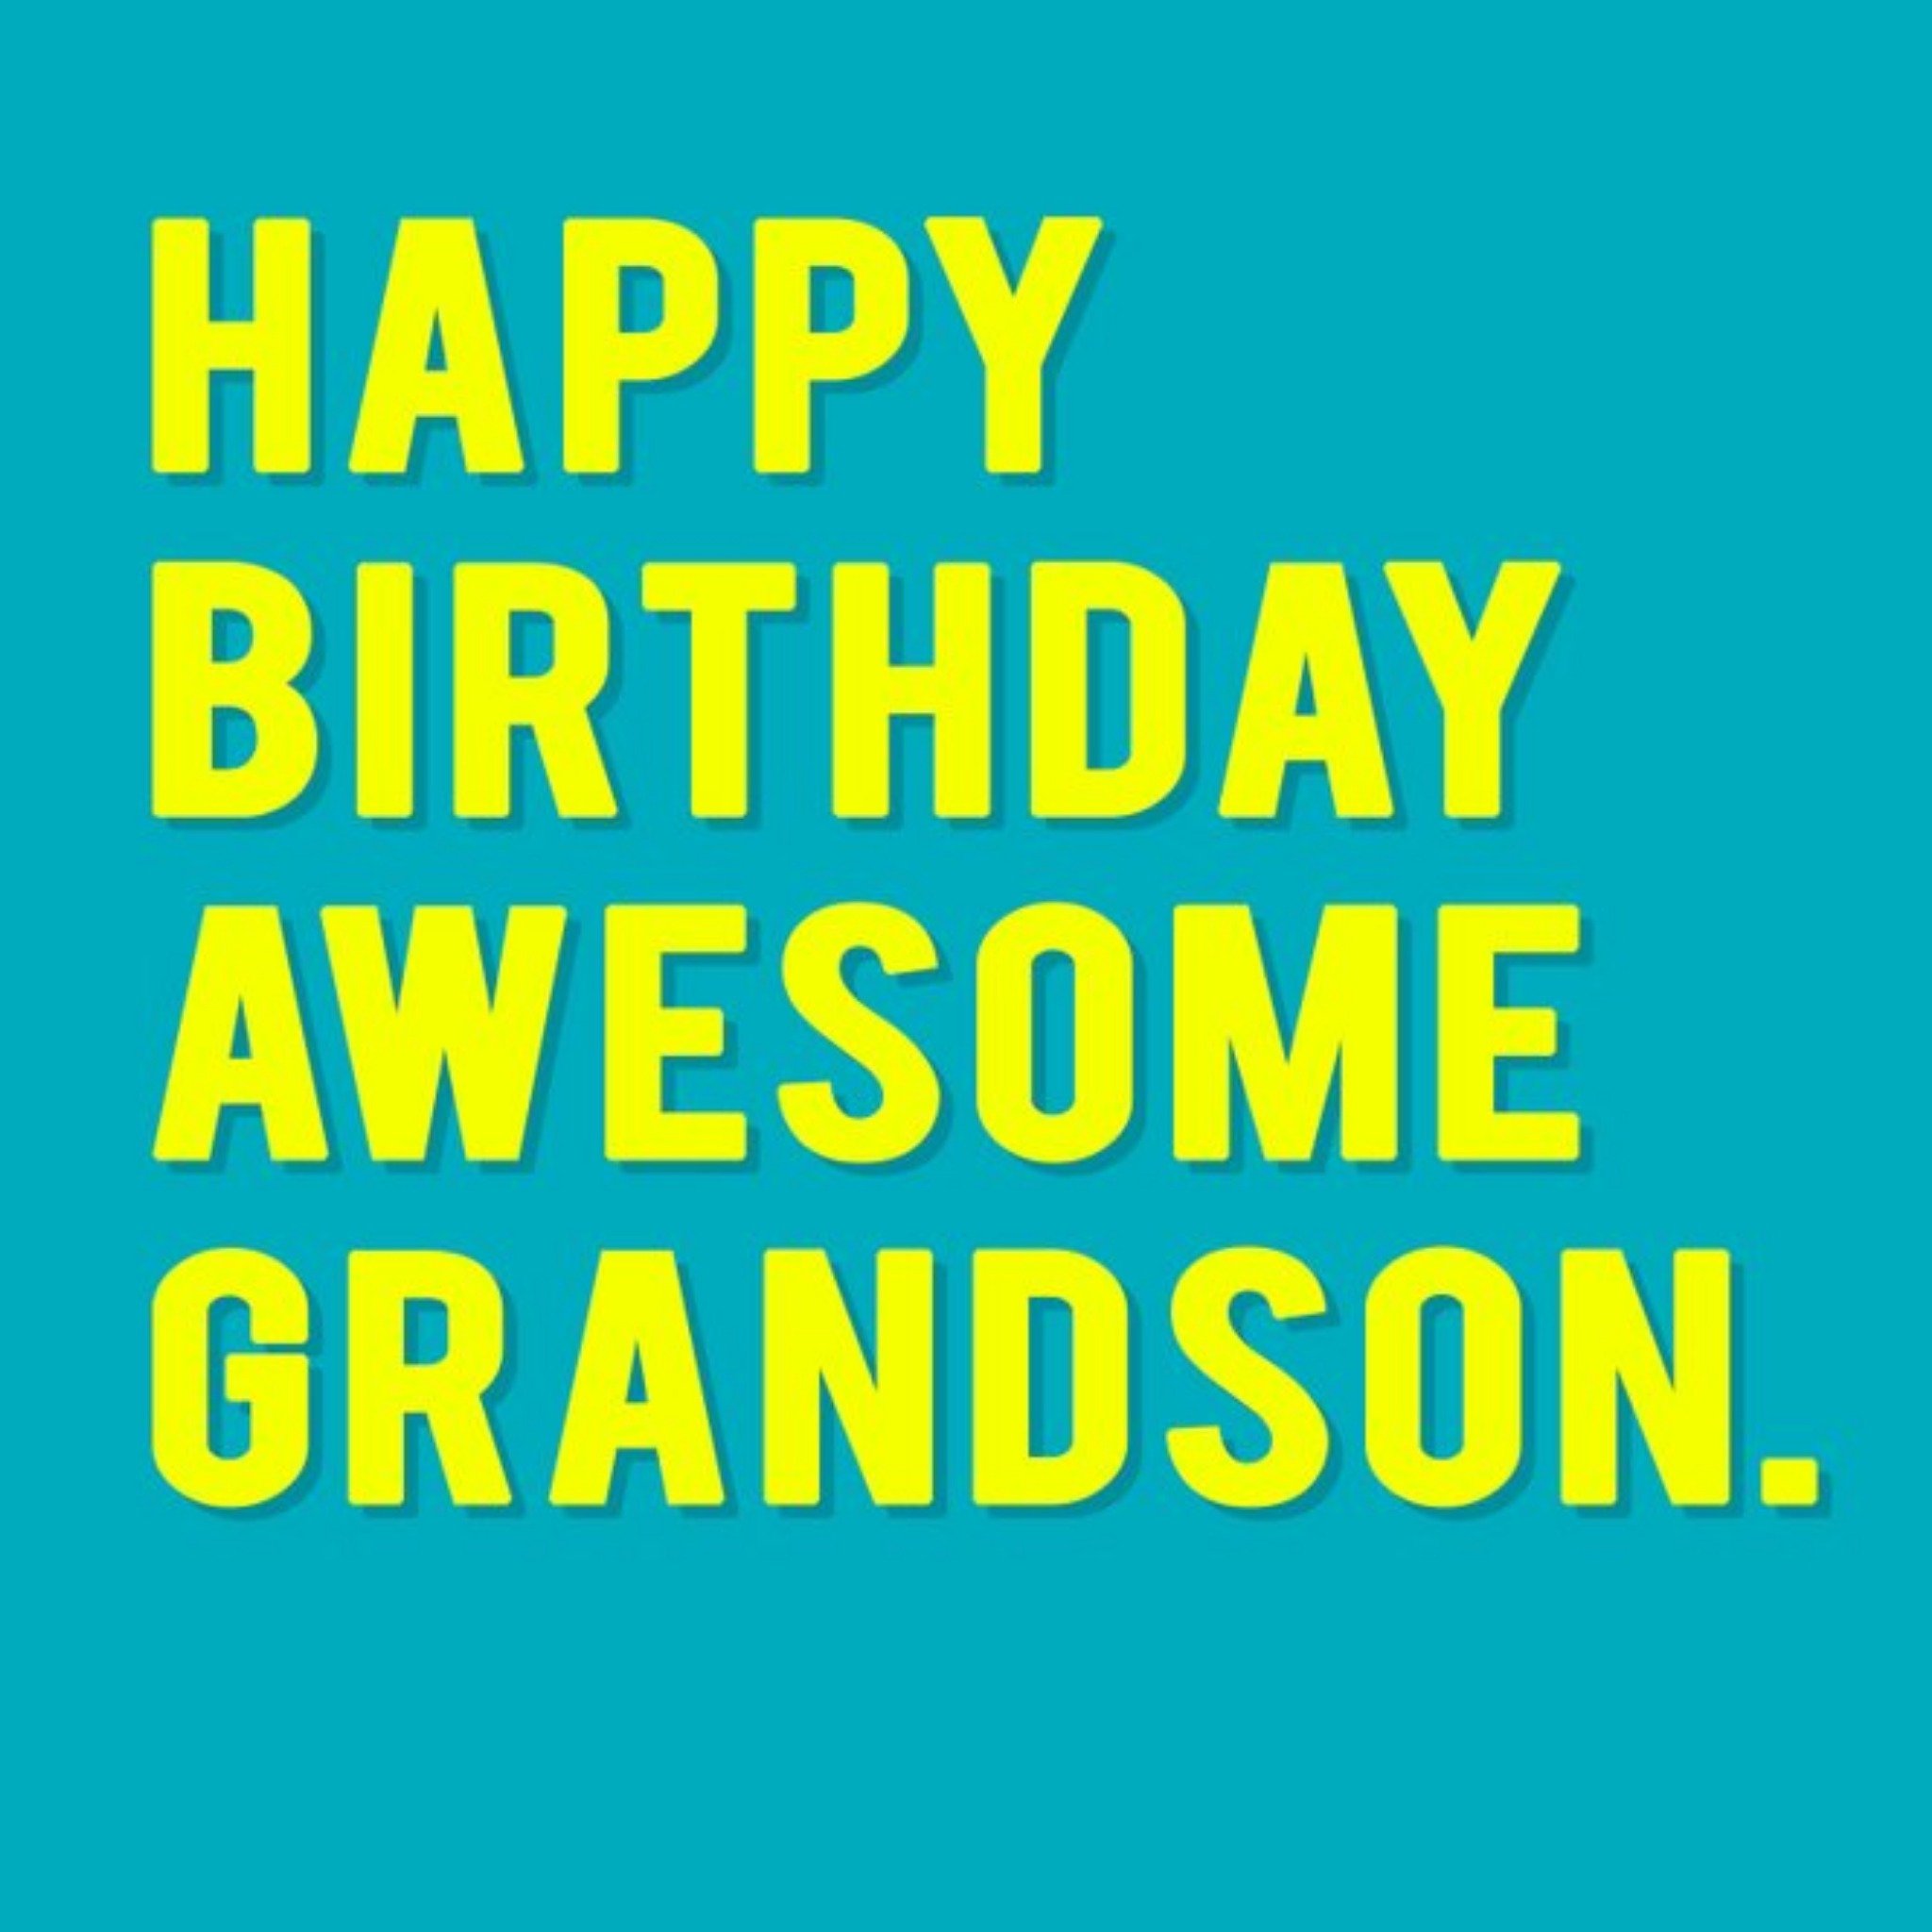 Moonpig Modern Typographical Happy Birthday Awesome Grandson Card, Square